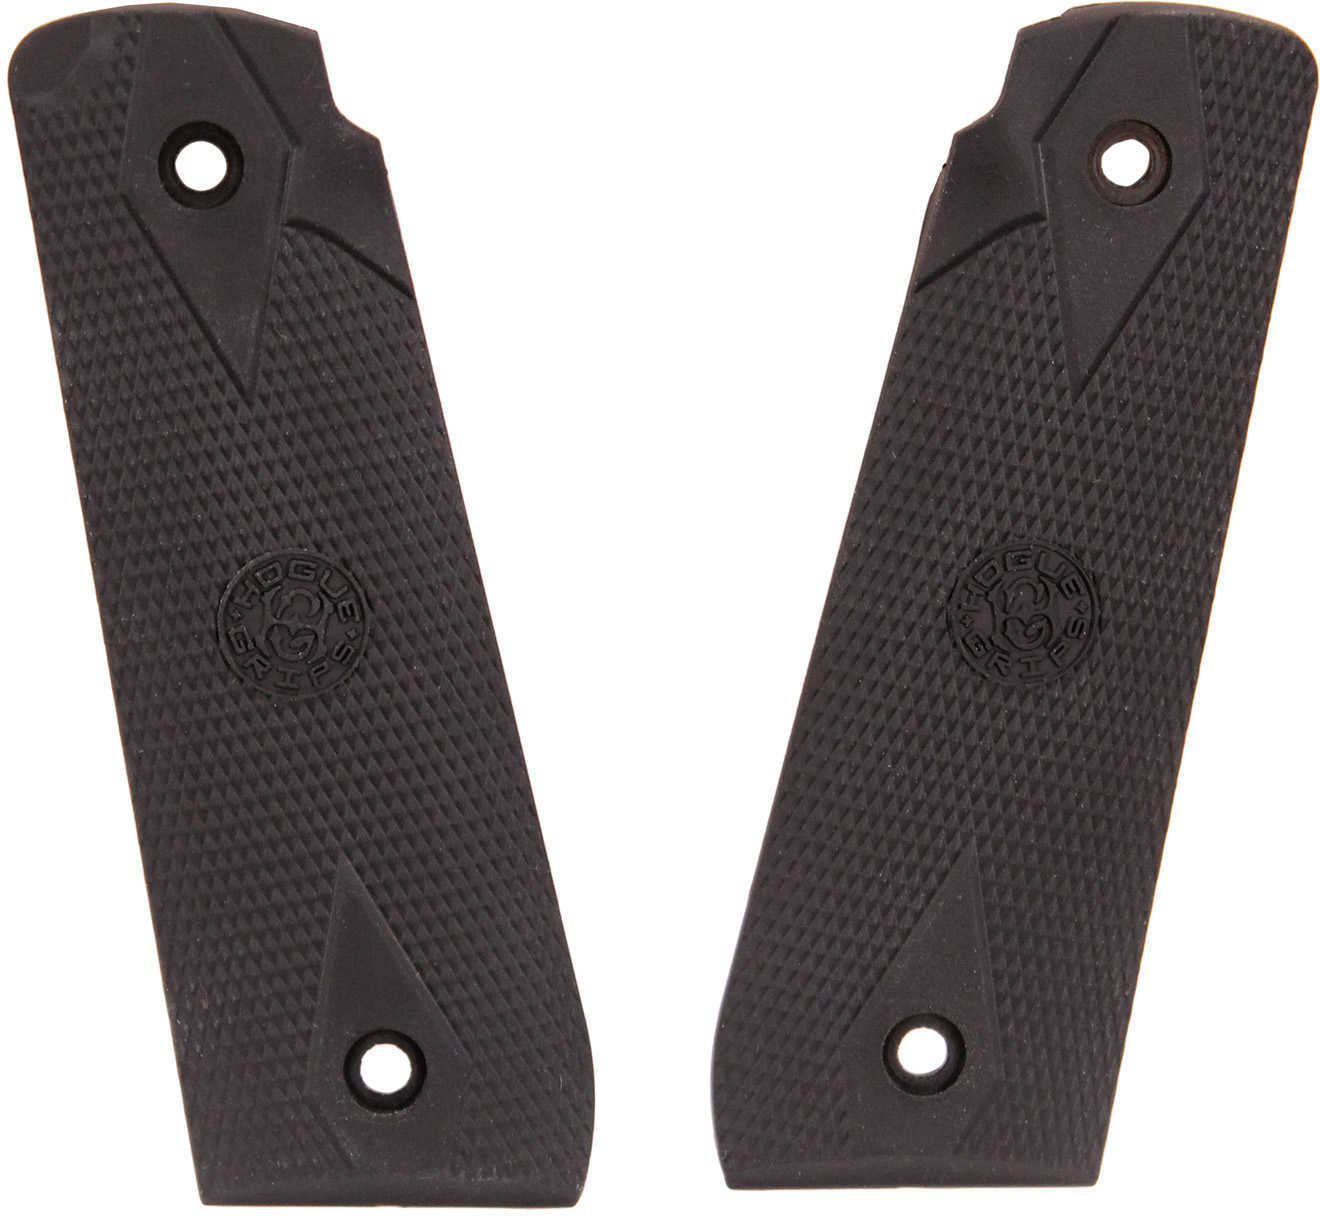 Hogue Ruger 22/45 MKIV Rubber Grip Checkered with Diamonds, Black